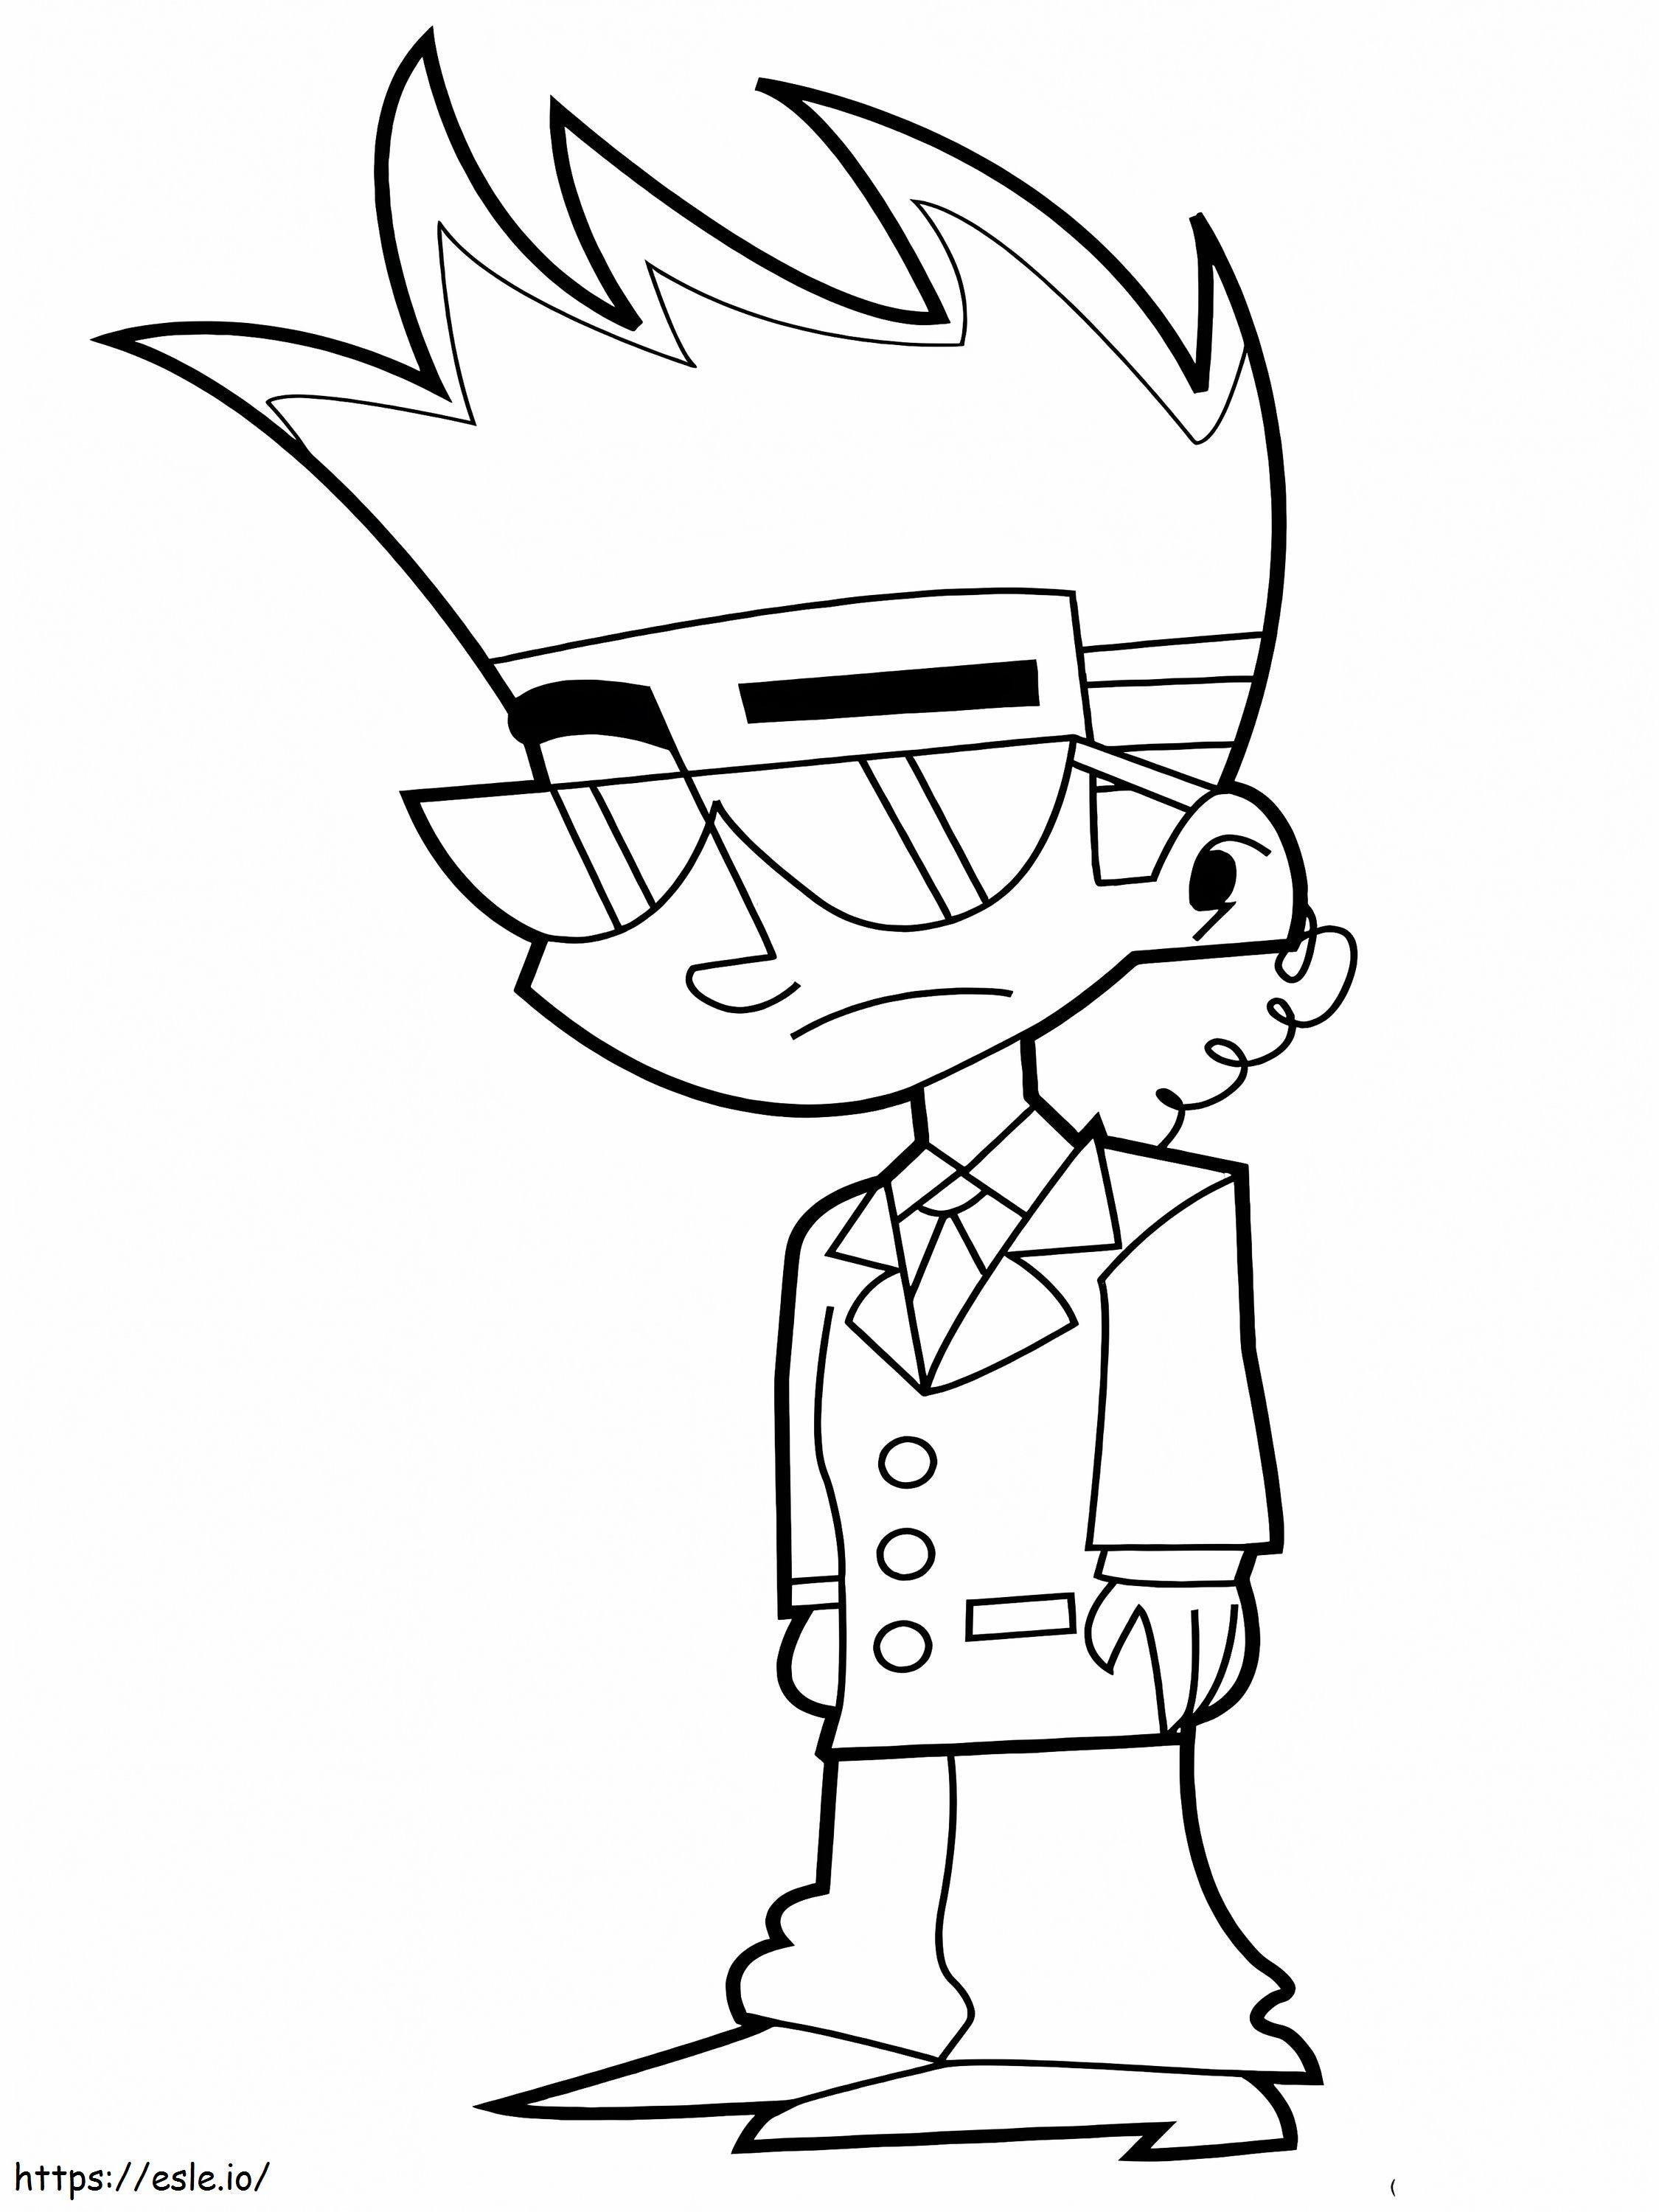 Cool Johnny Test coloring page